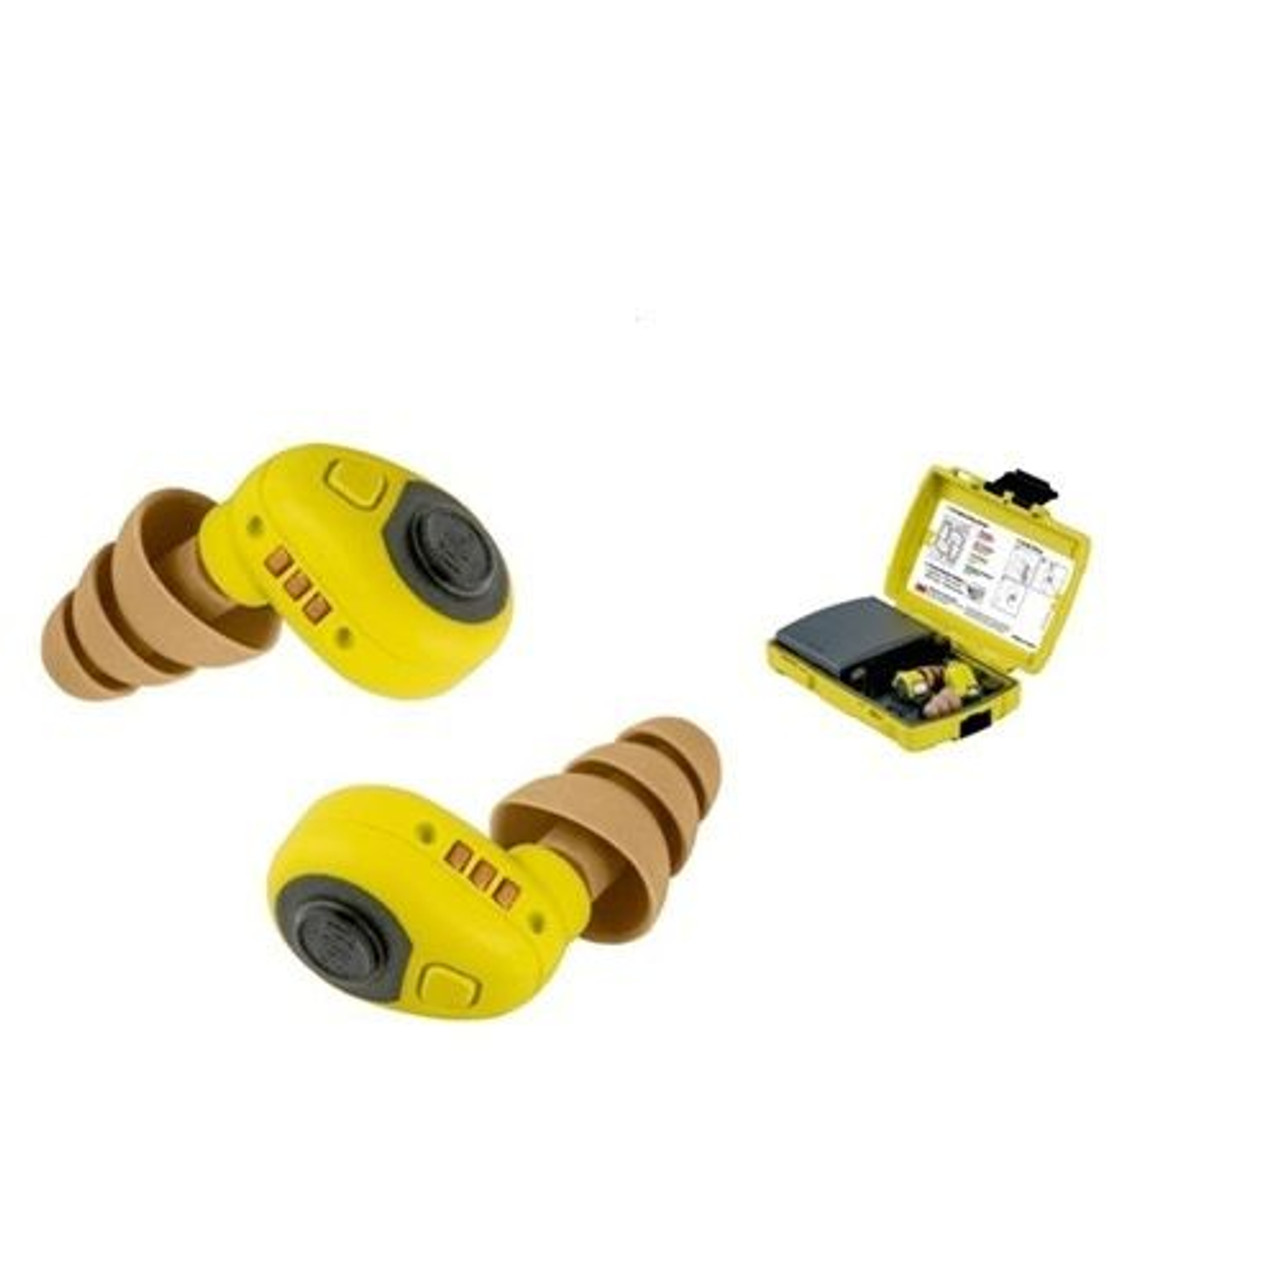 3M LEP-200 PELTOR Level Dependent Earplug Industrial Safety Products